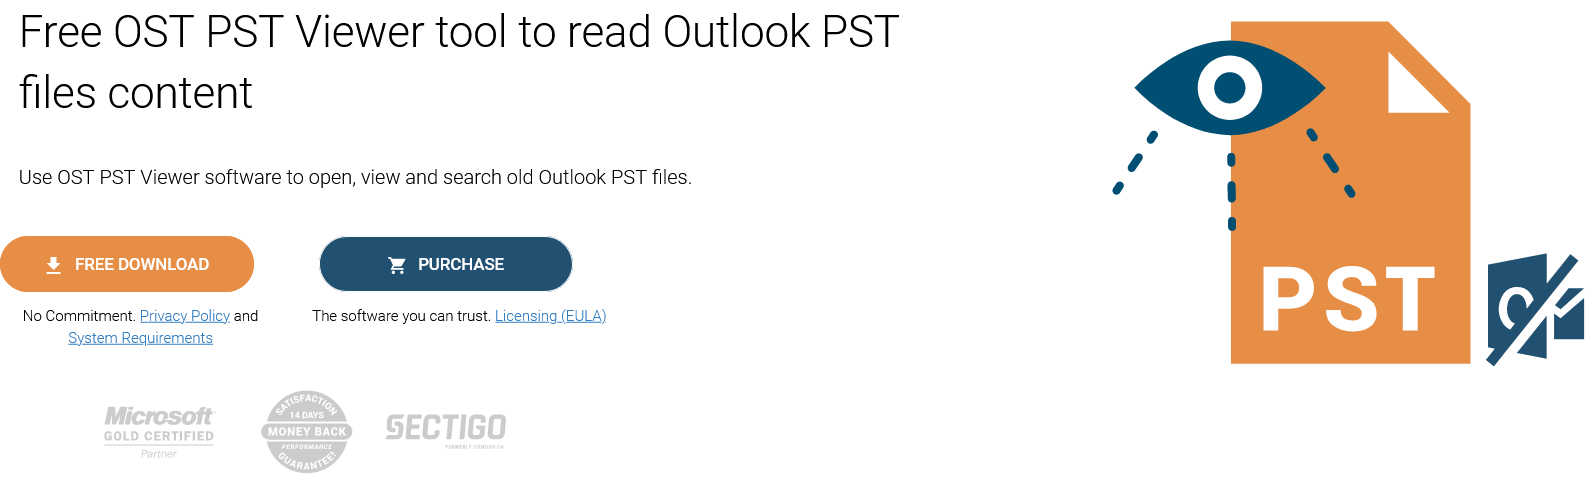 OST PST Viewer tool to read Outlook PST